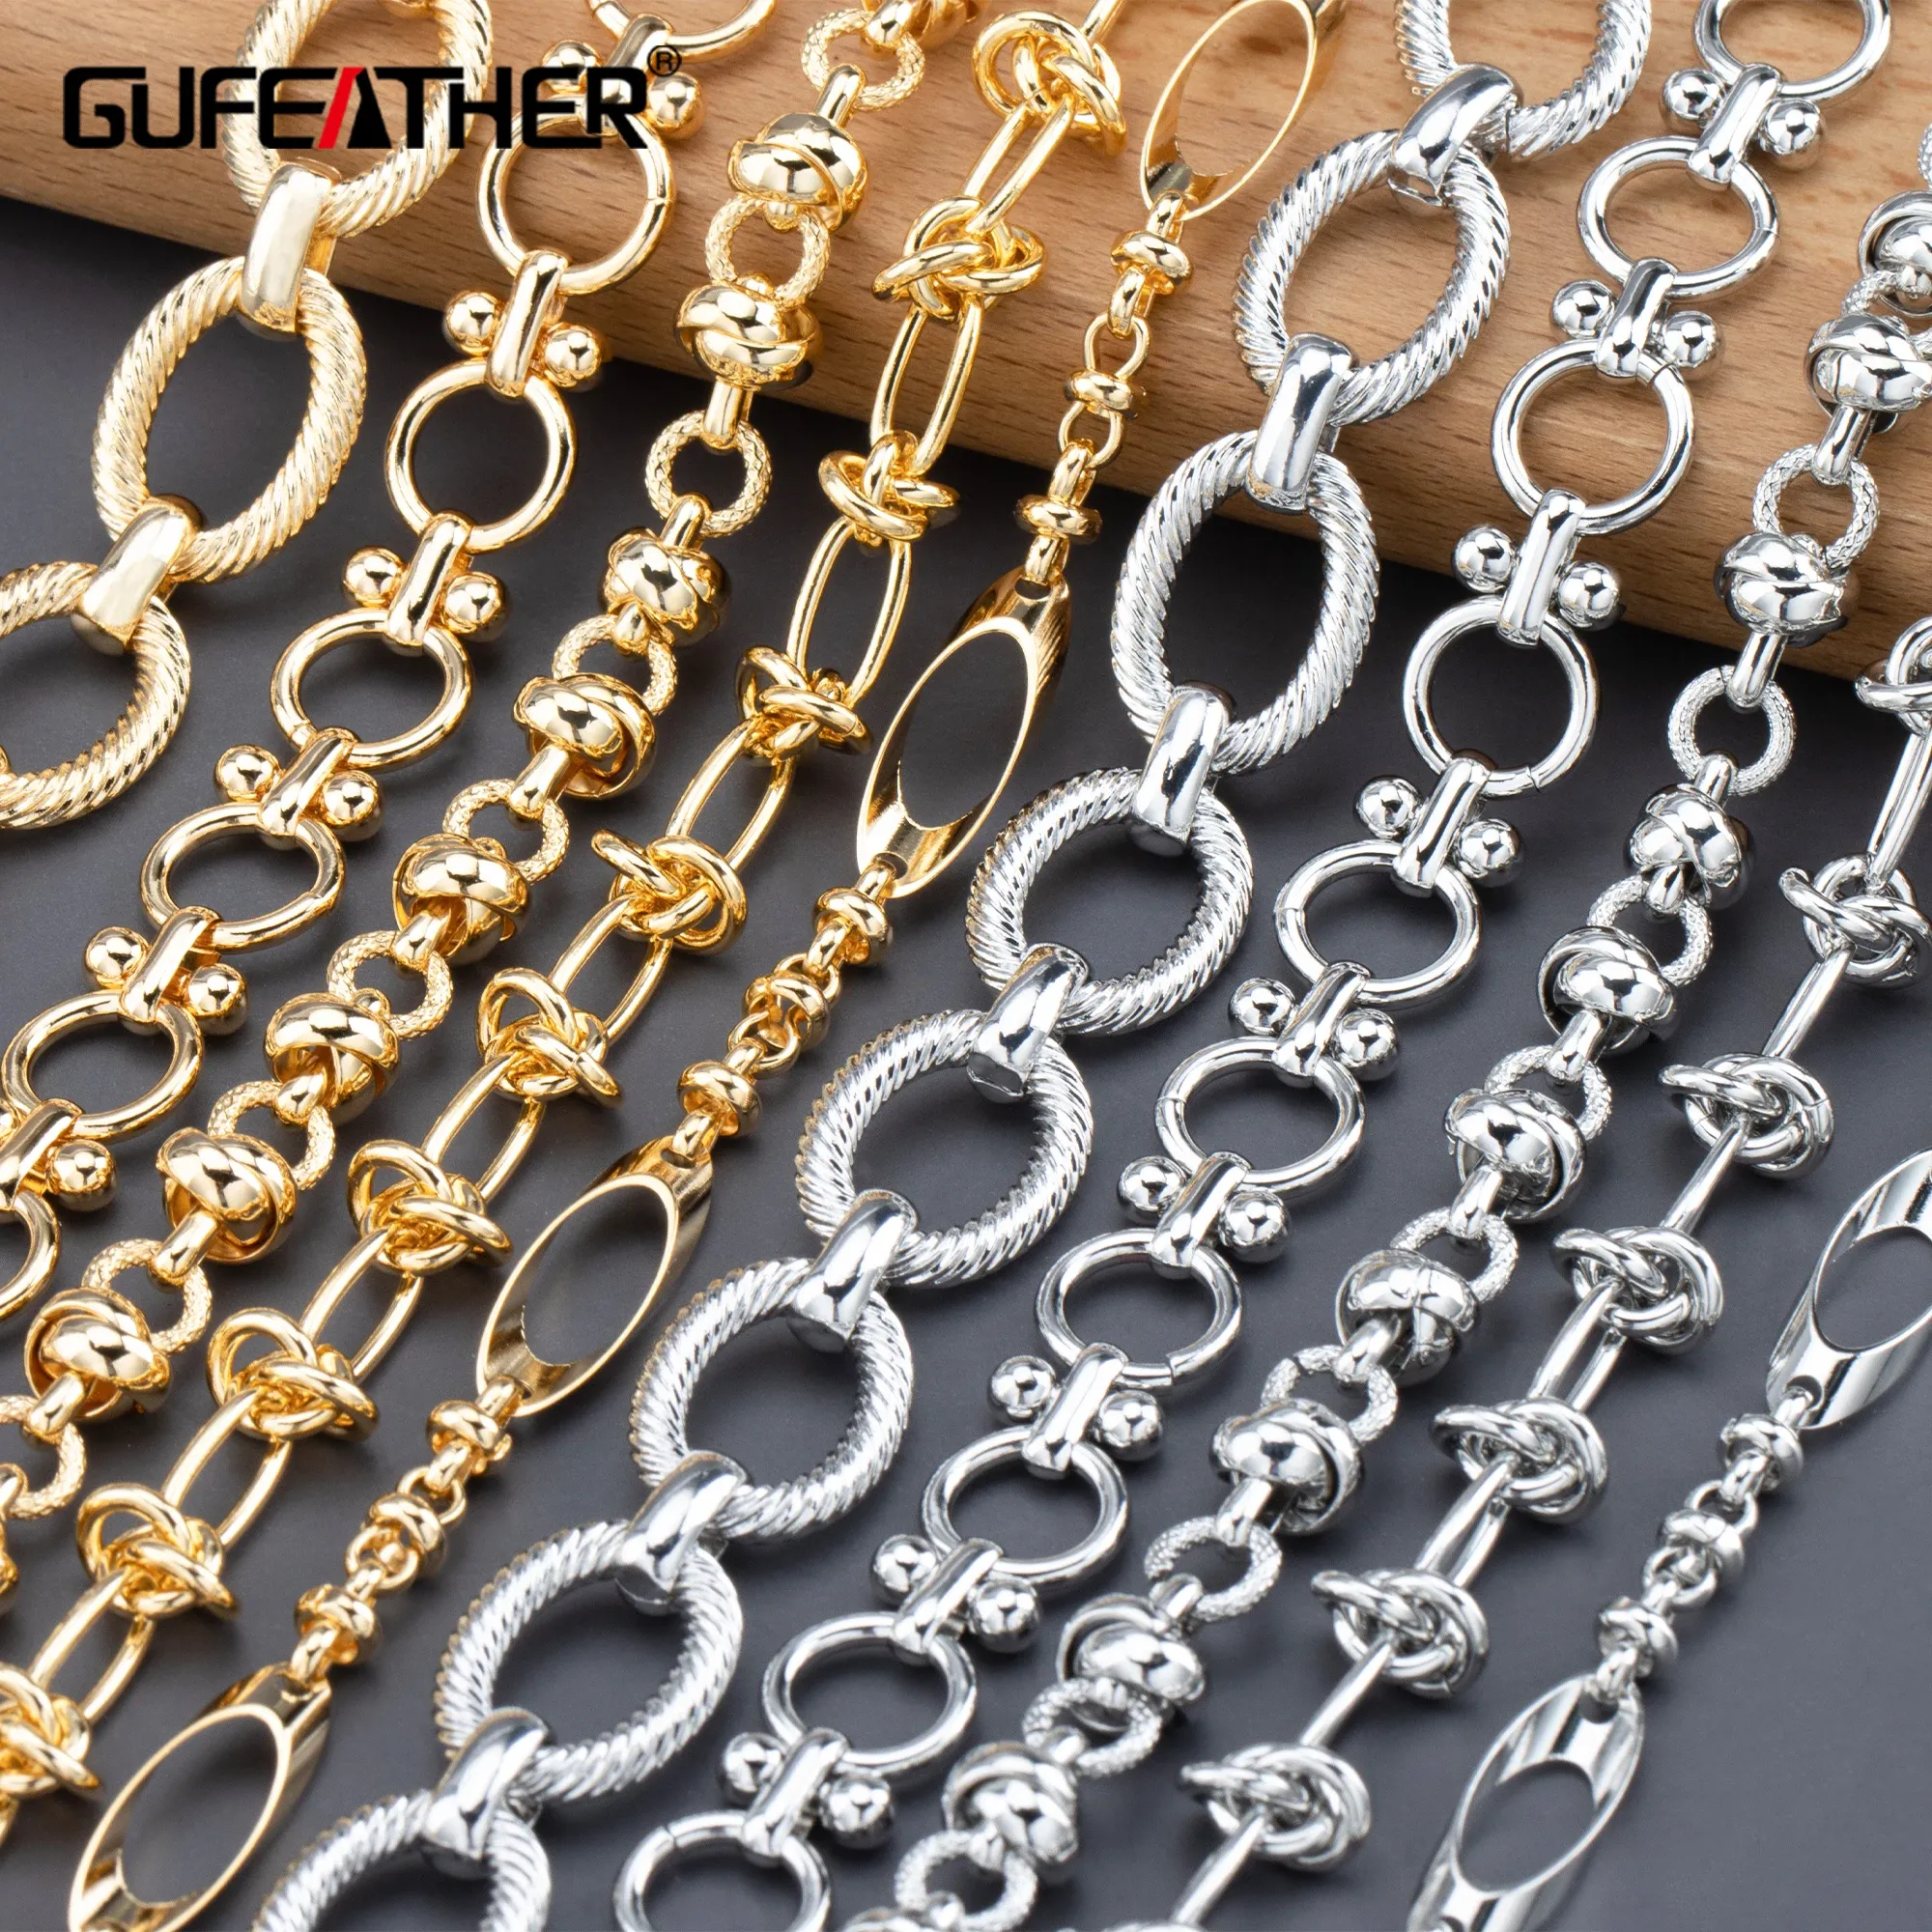 Strands GUFEATHER C145,diy chain,pass REACH,nickel free,18k gold rhodium plated,hand made,jewelry making,diy bracelet necklace,1m/lot